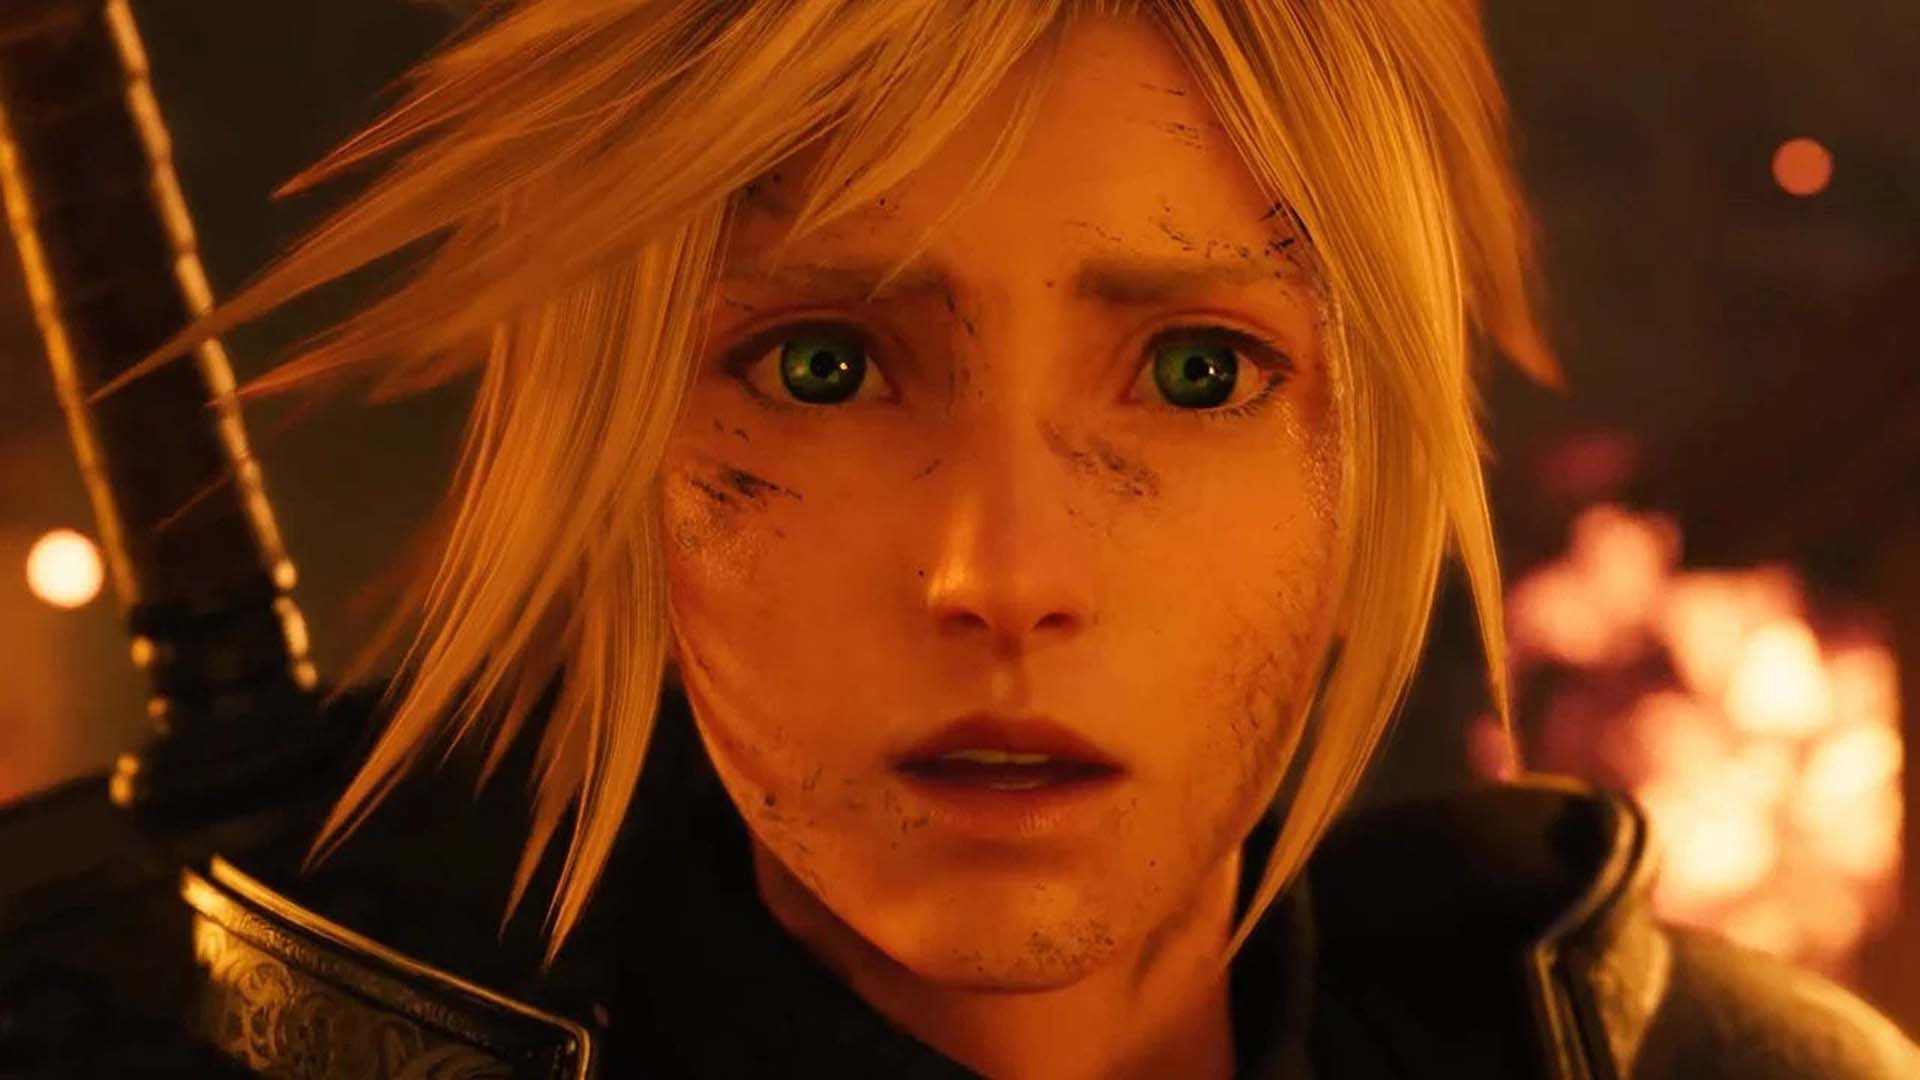 Exciting glimpse of Final Fantasy 7 Rebirth showcasing key characters and vibrant, dynamic gameplay.